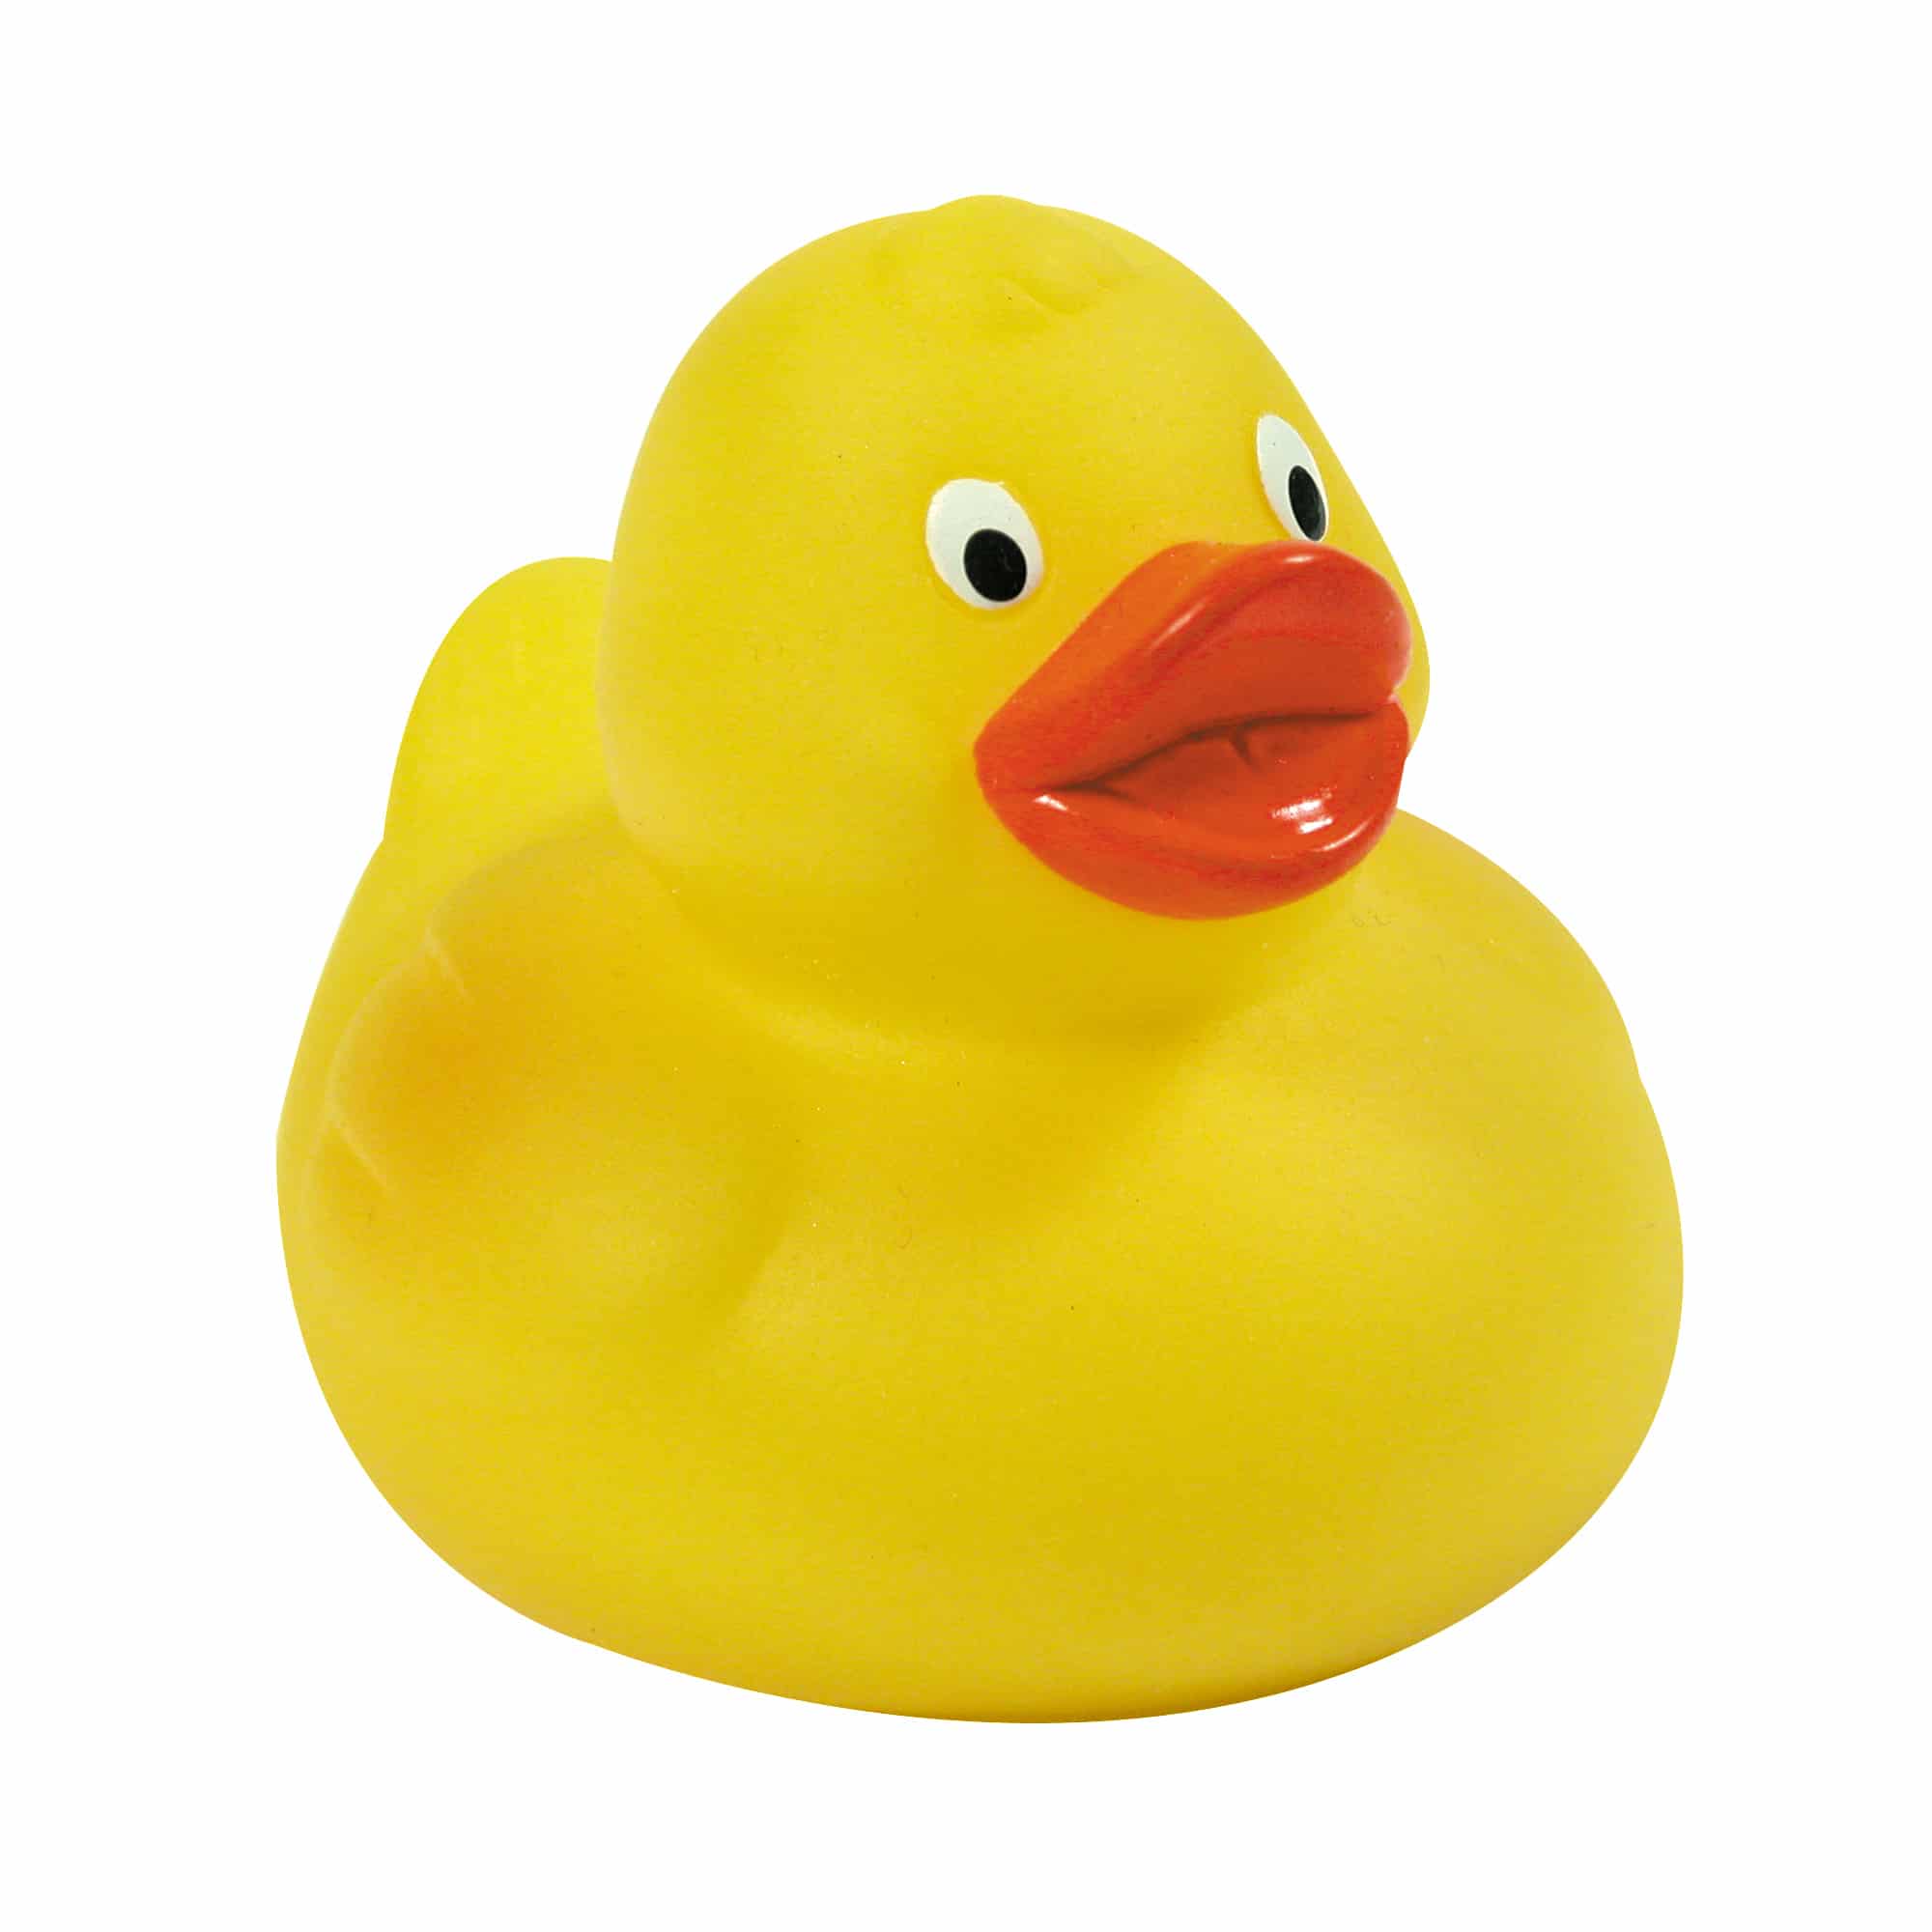 https://schylling.com/wp-content/uploads/2020/08/RDKY-Classic-Yellow-Rubber-Duck_web.jpg